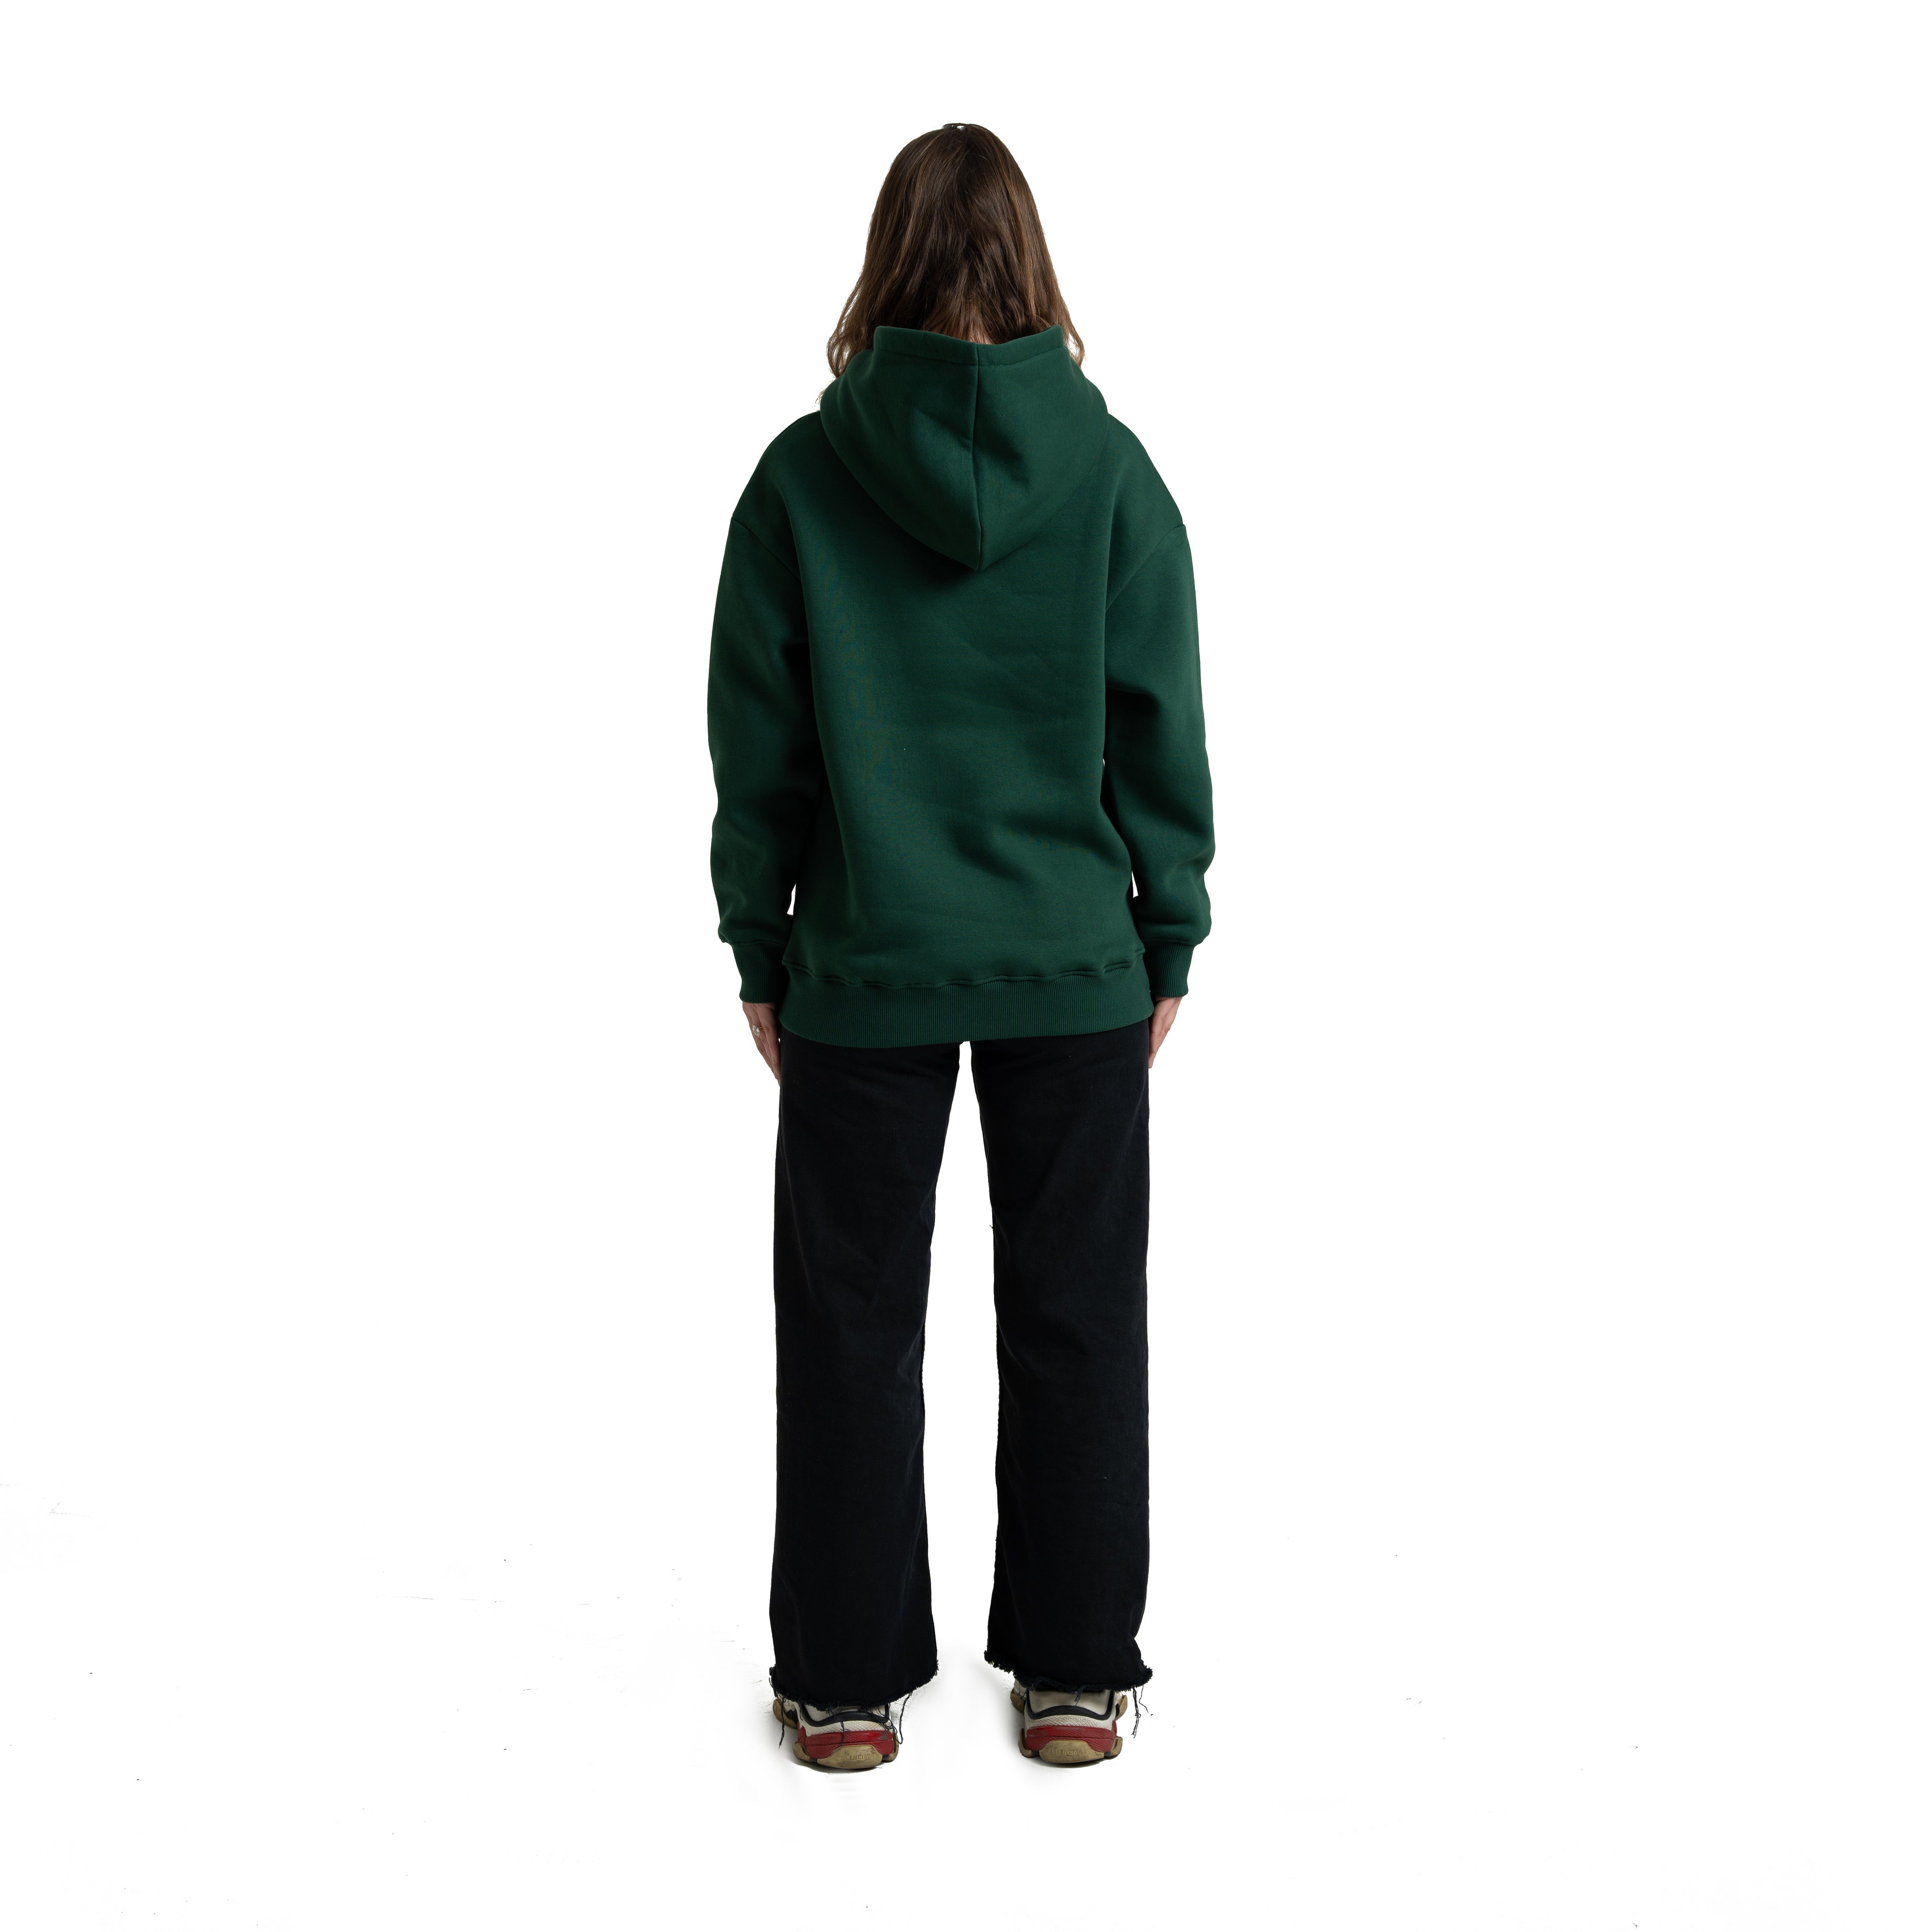 Other Face Unforgettable Green Hoodie